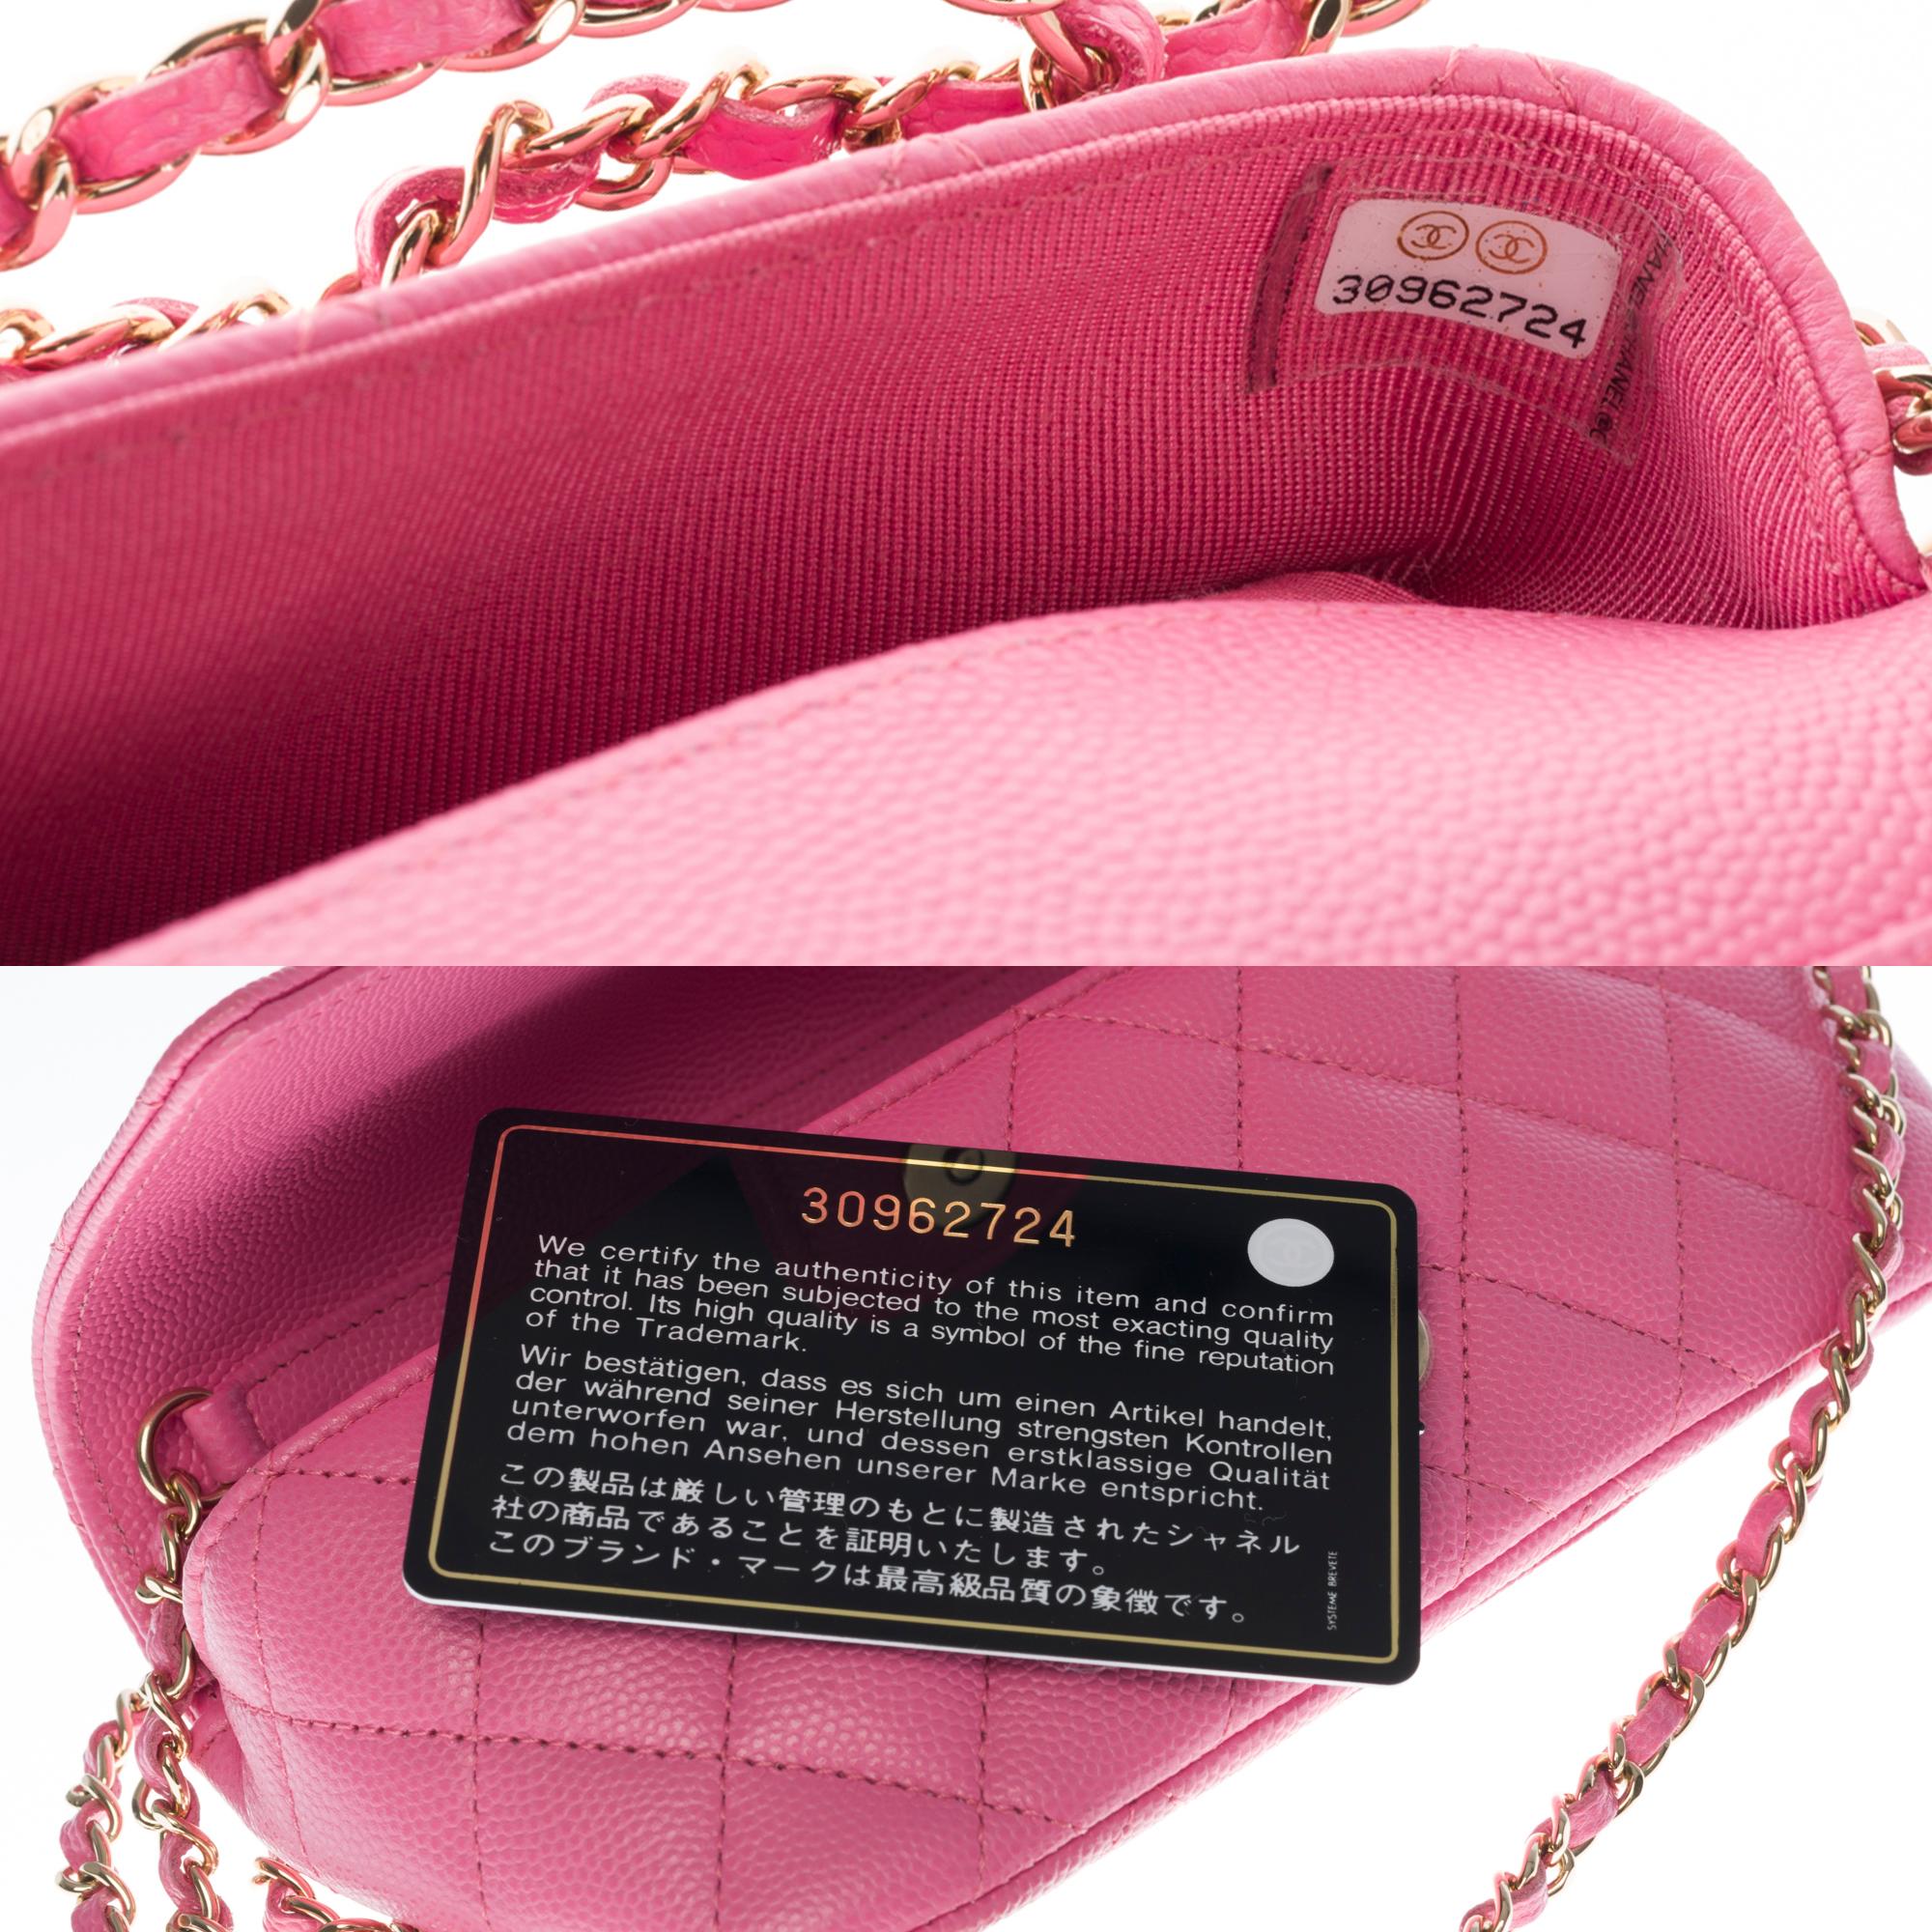 Pink Chanel Classique Sunglasses Bag/Case in pink caviar quilted leather, Champagne HW